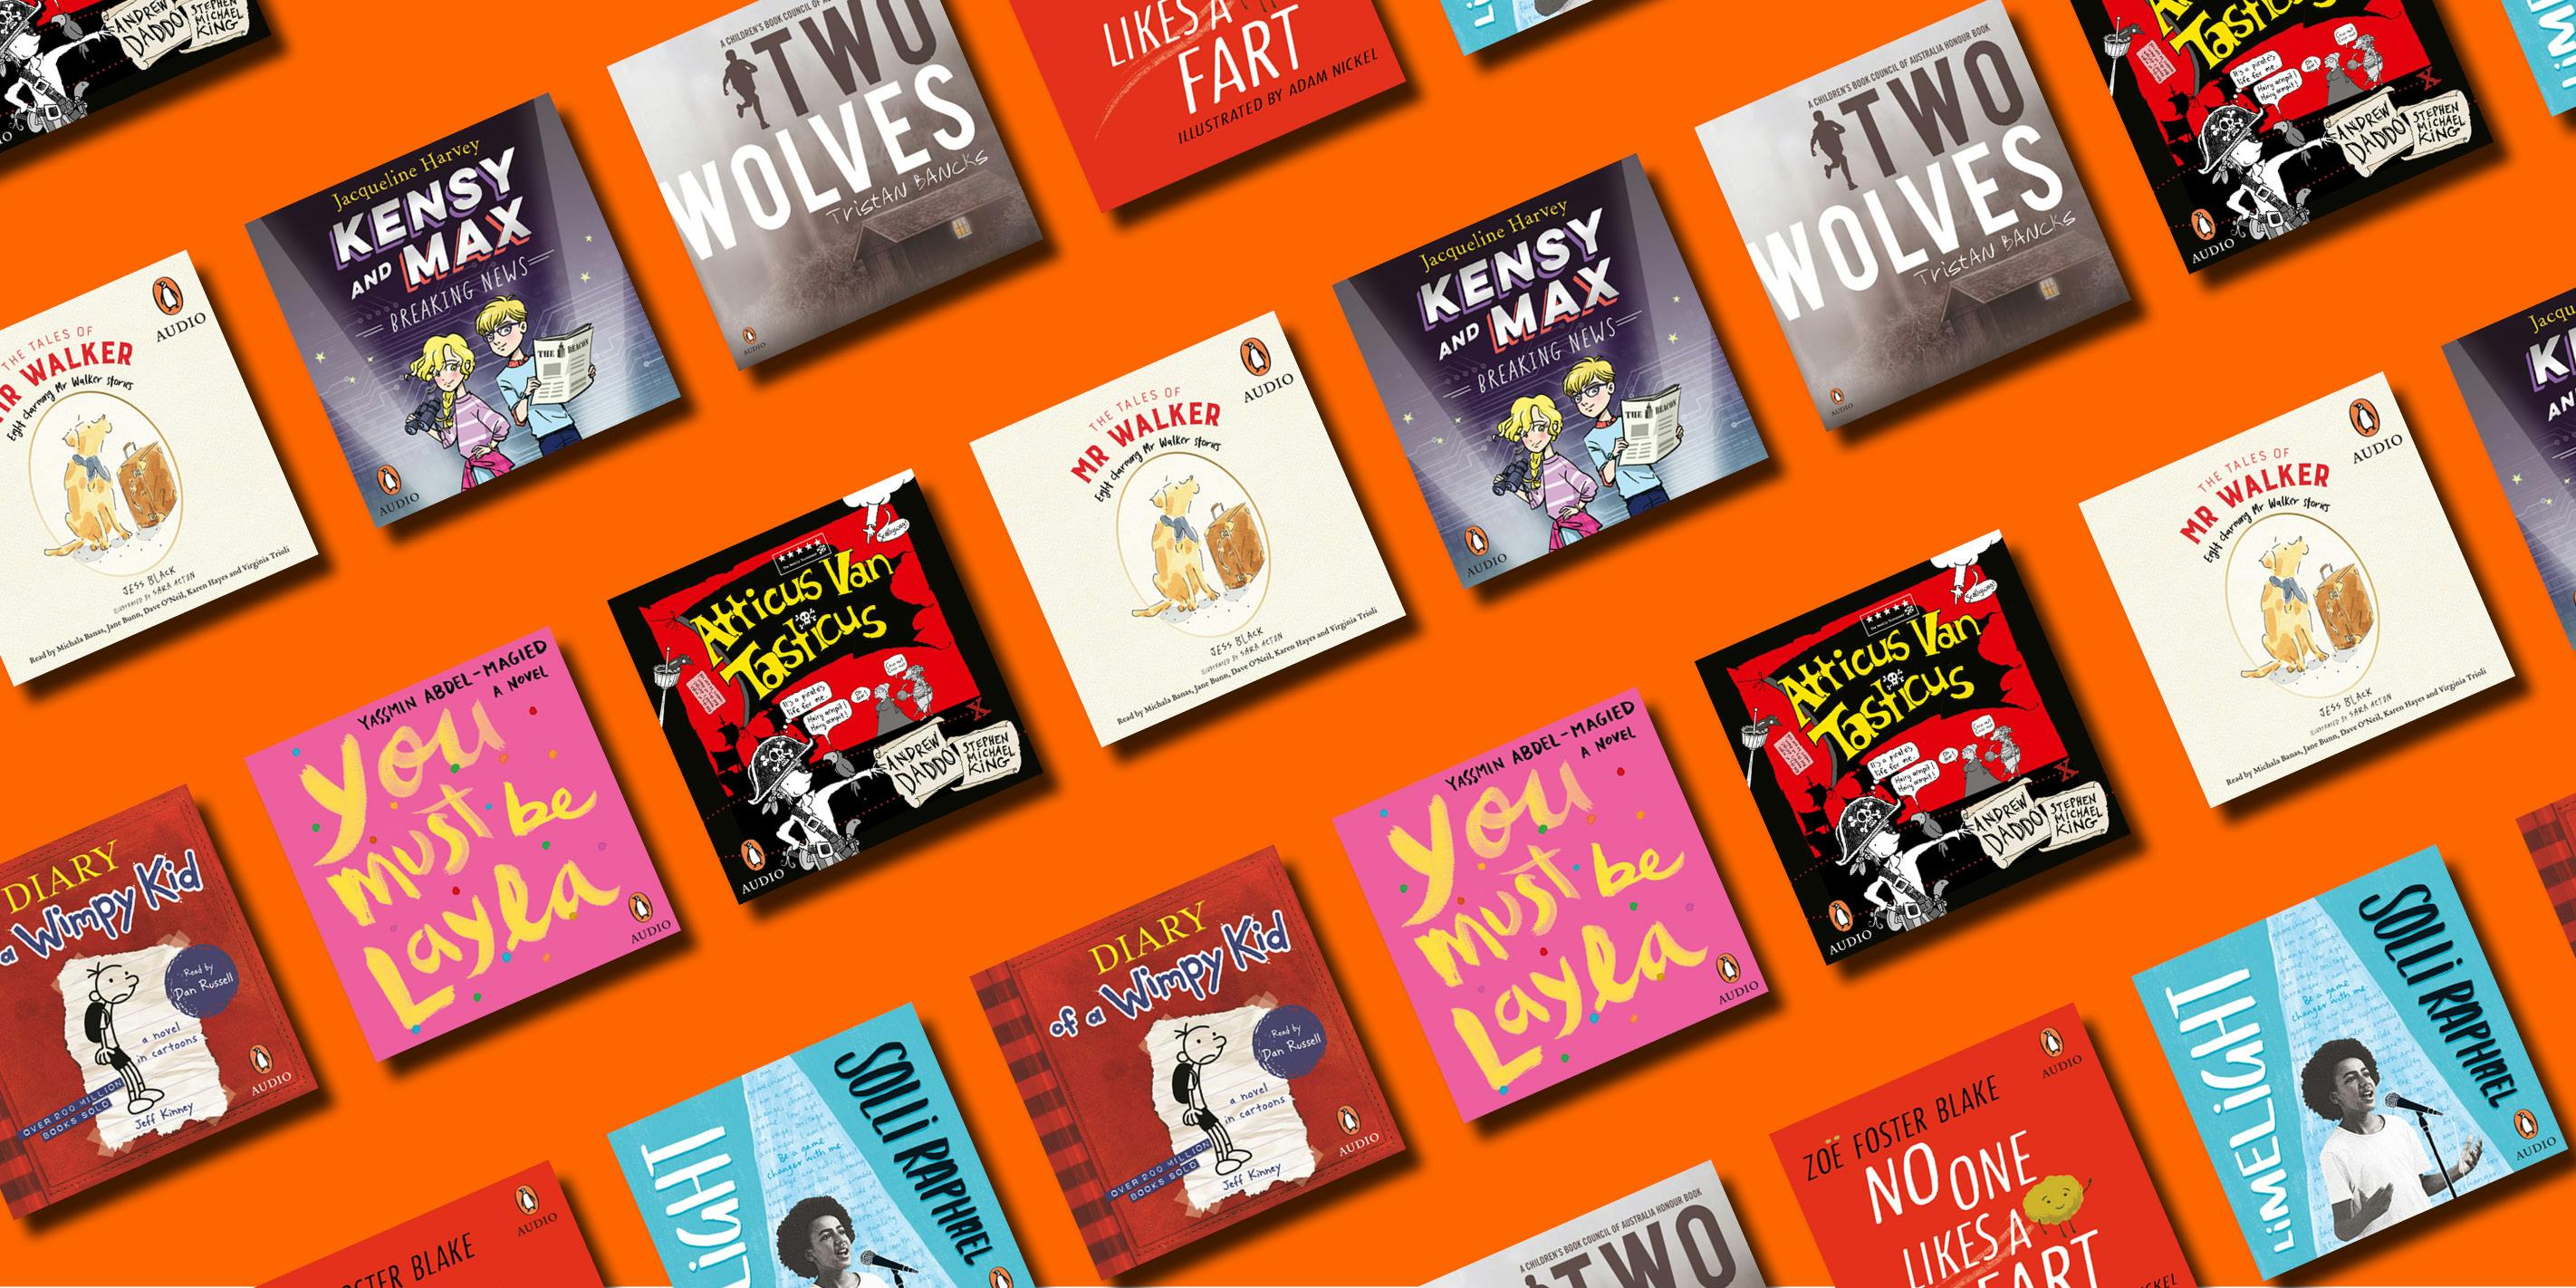 9 audiobooks for the whole family to enjoy